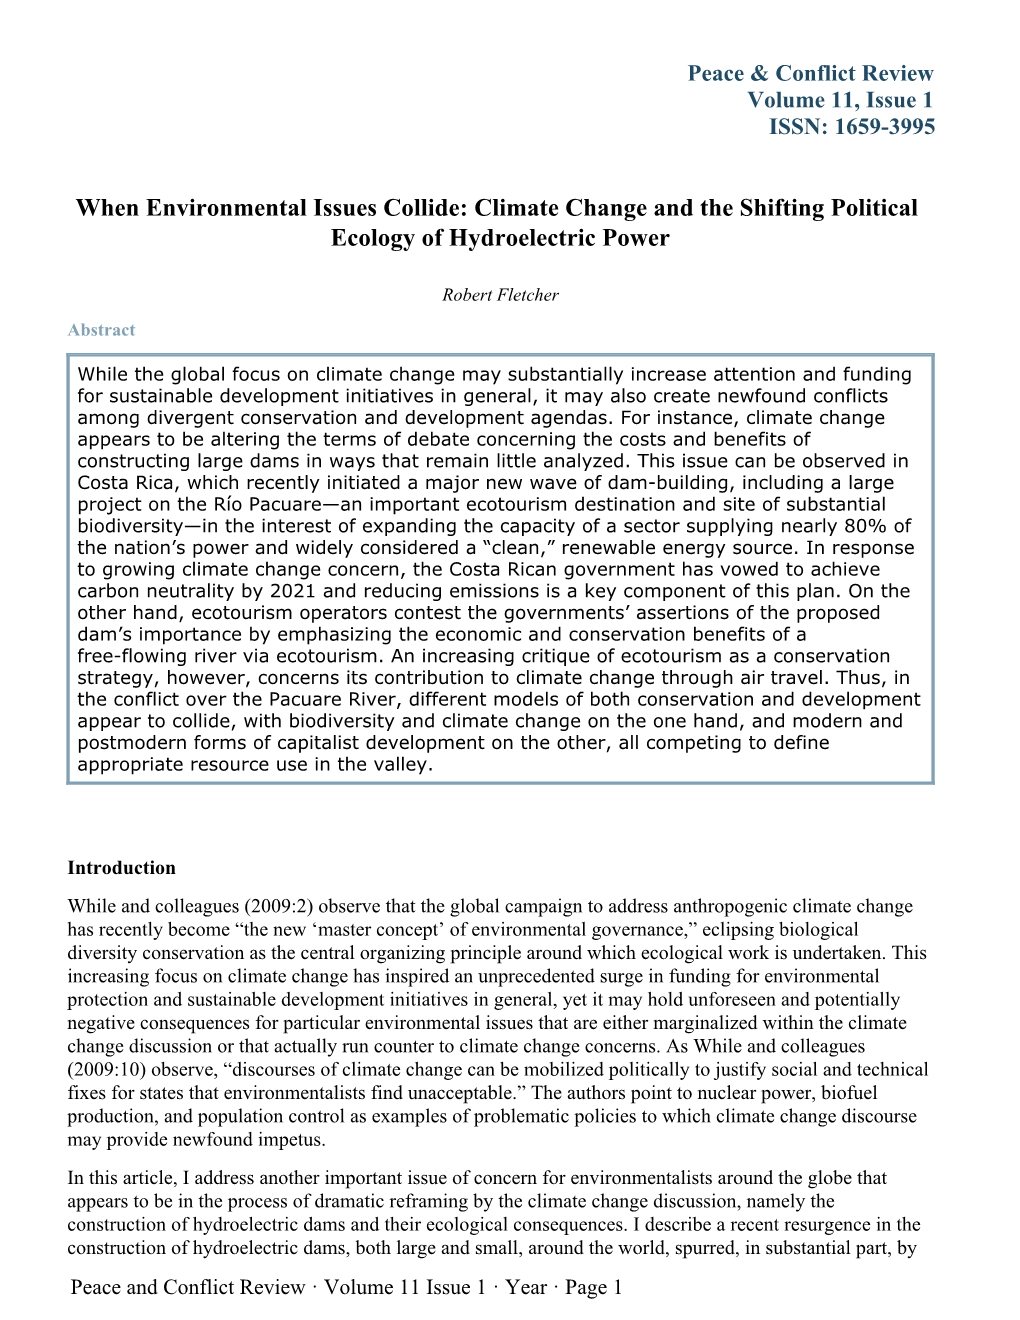 When Environmental Issues Collide: Climate Change and the Shifting Political Ecology of Hydroelectric Power